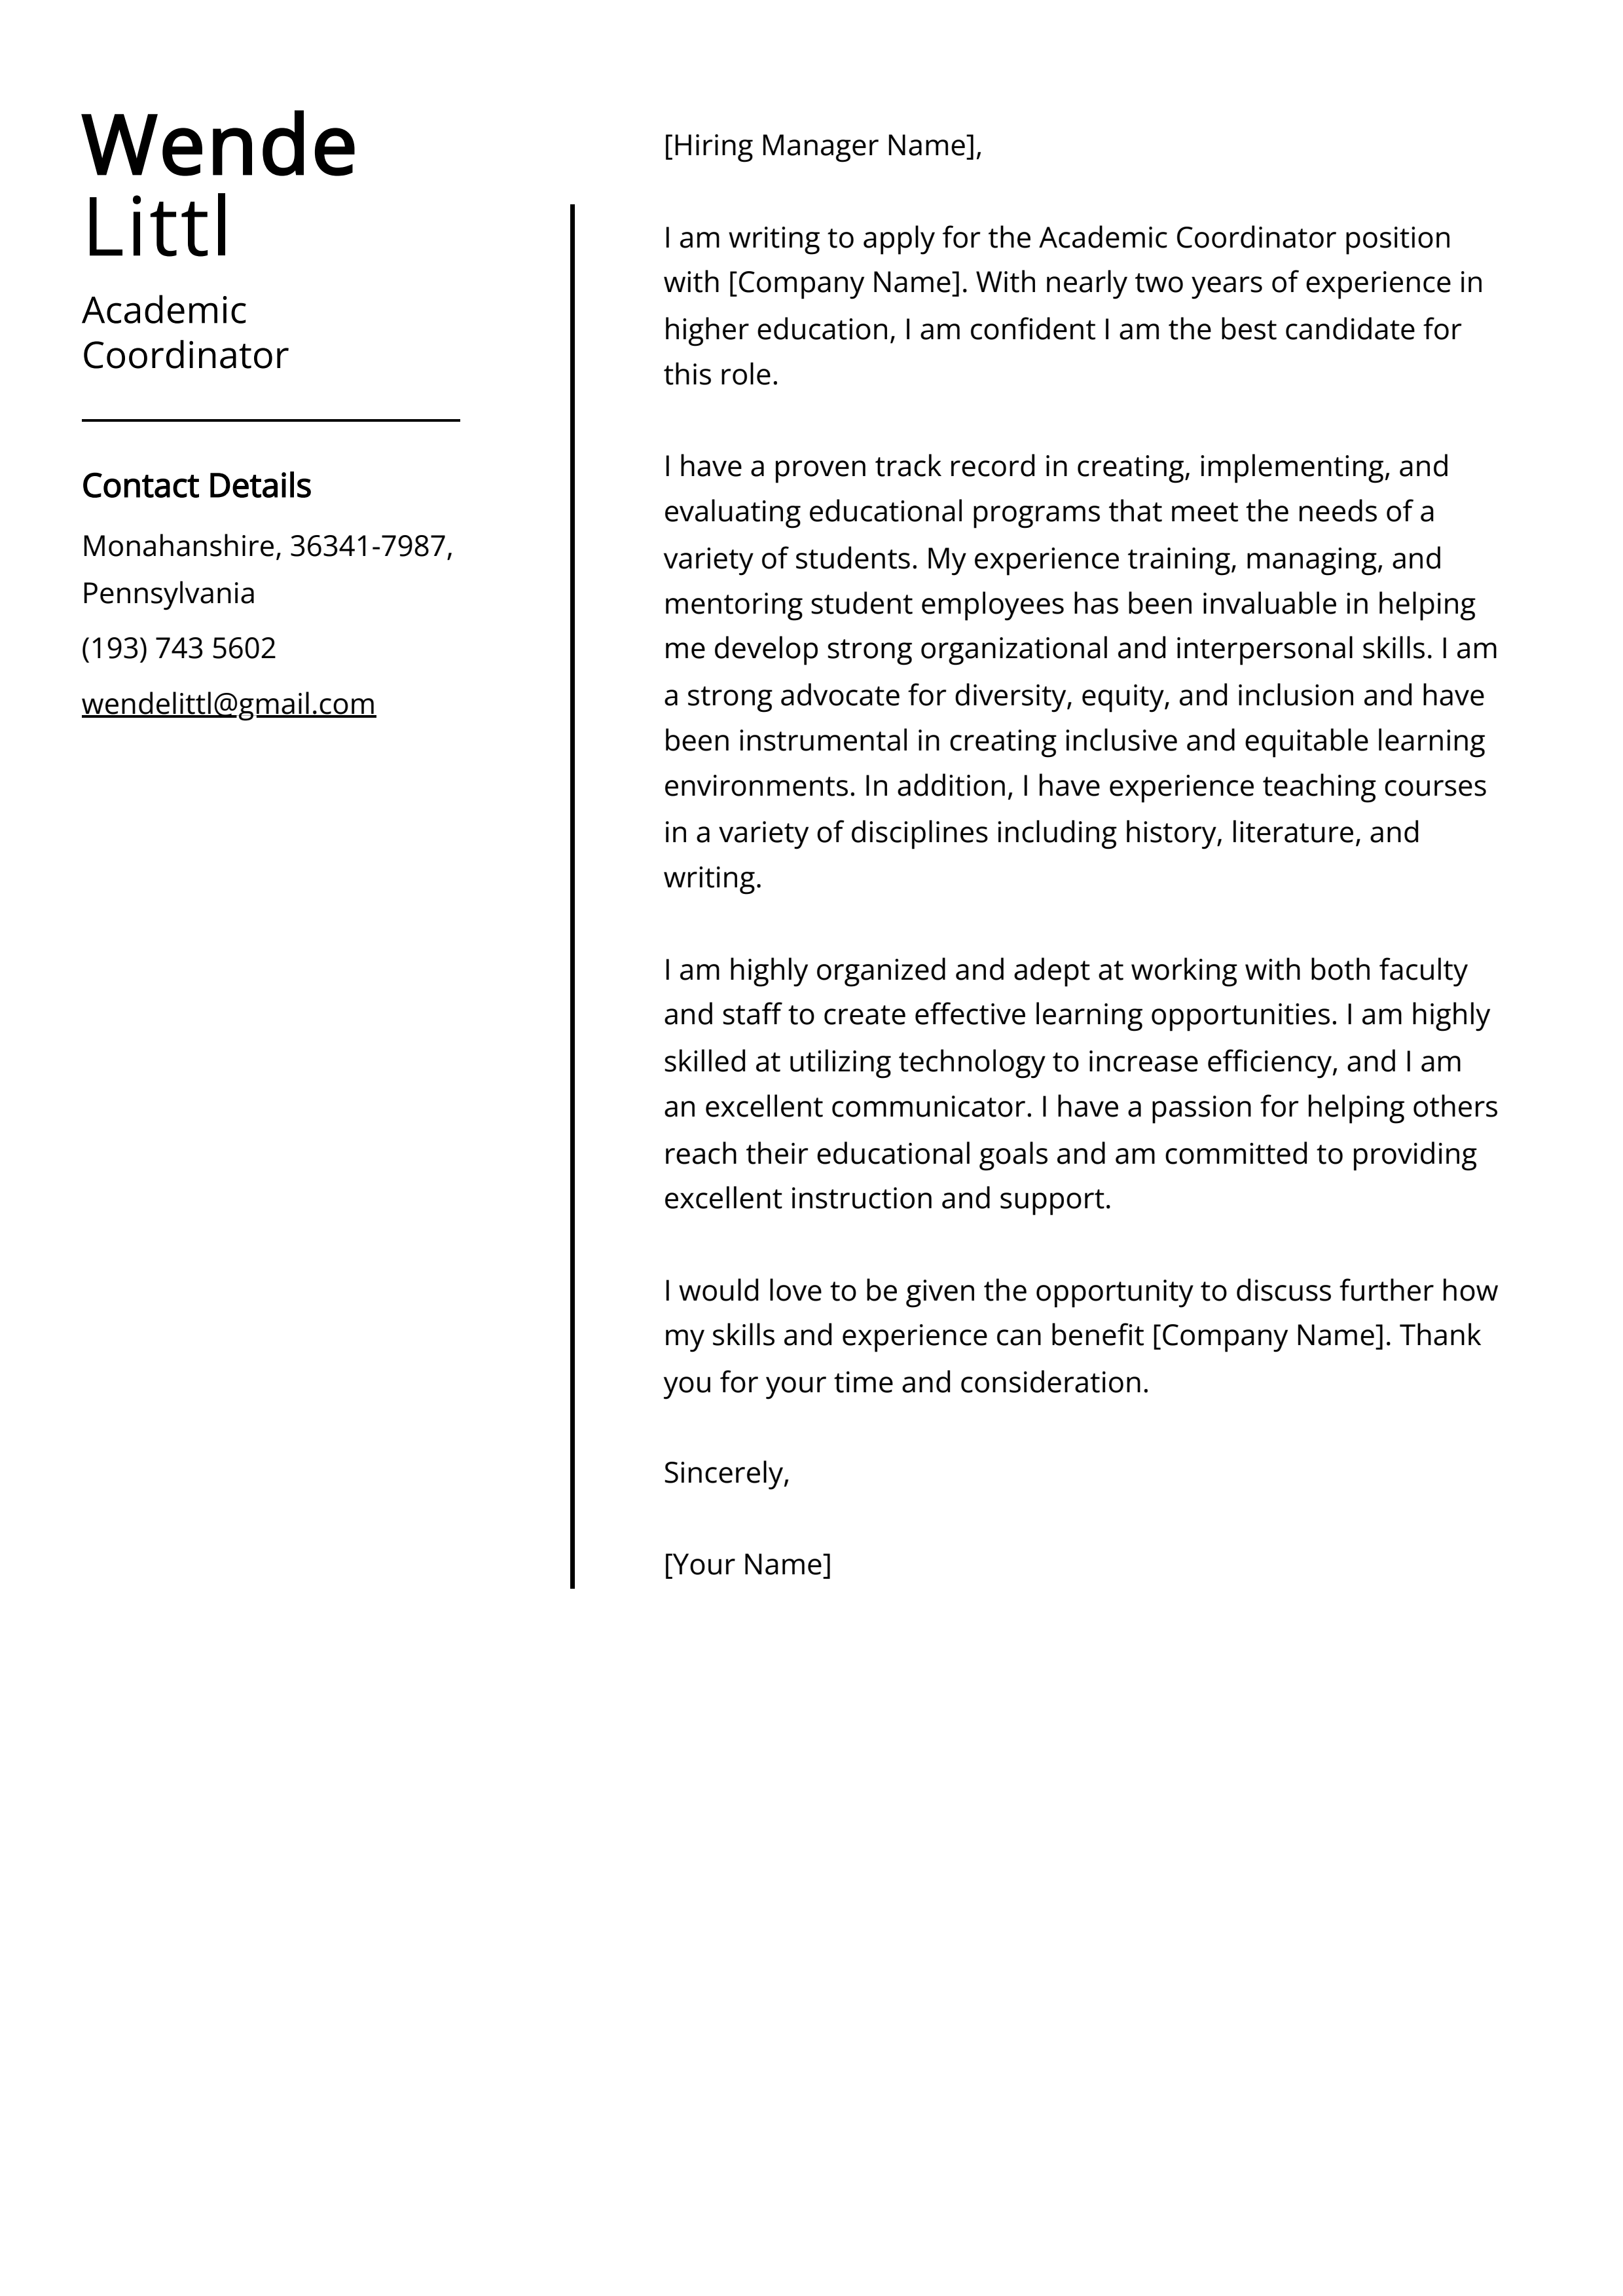 Academic Coordinator Cover Letter Example